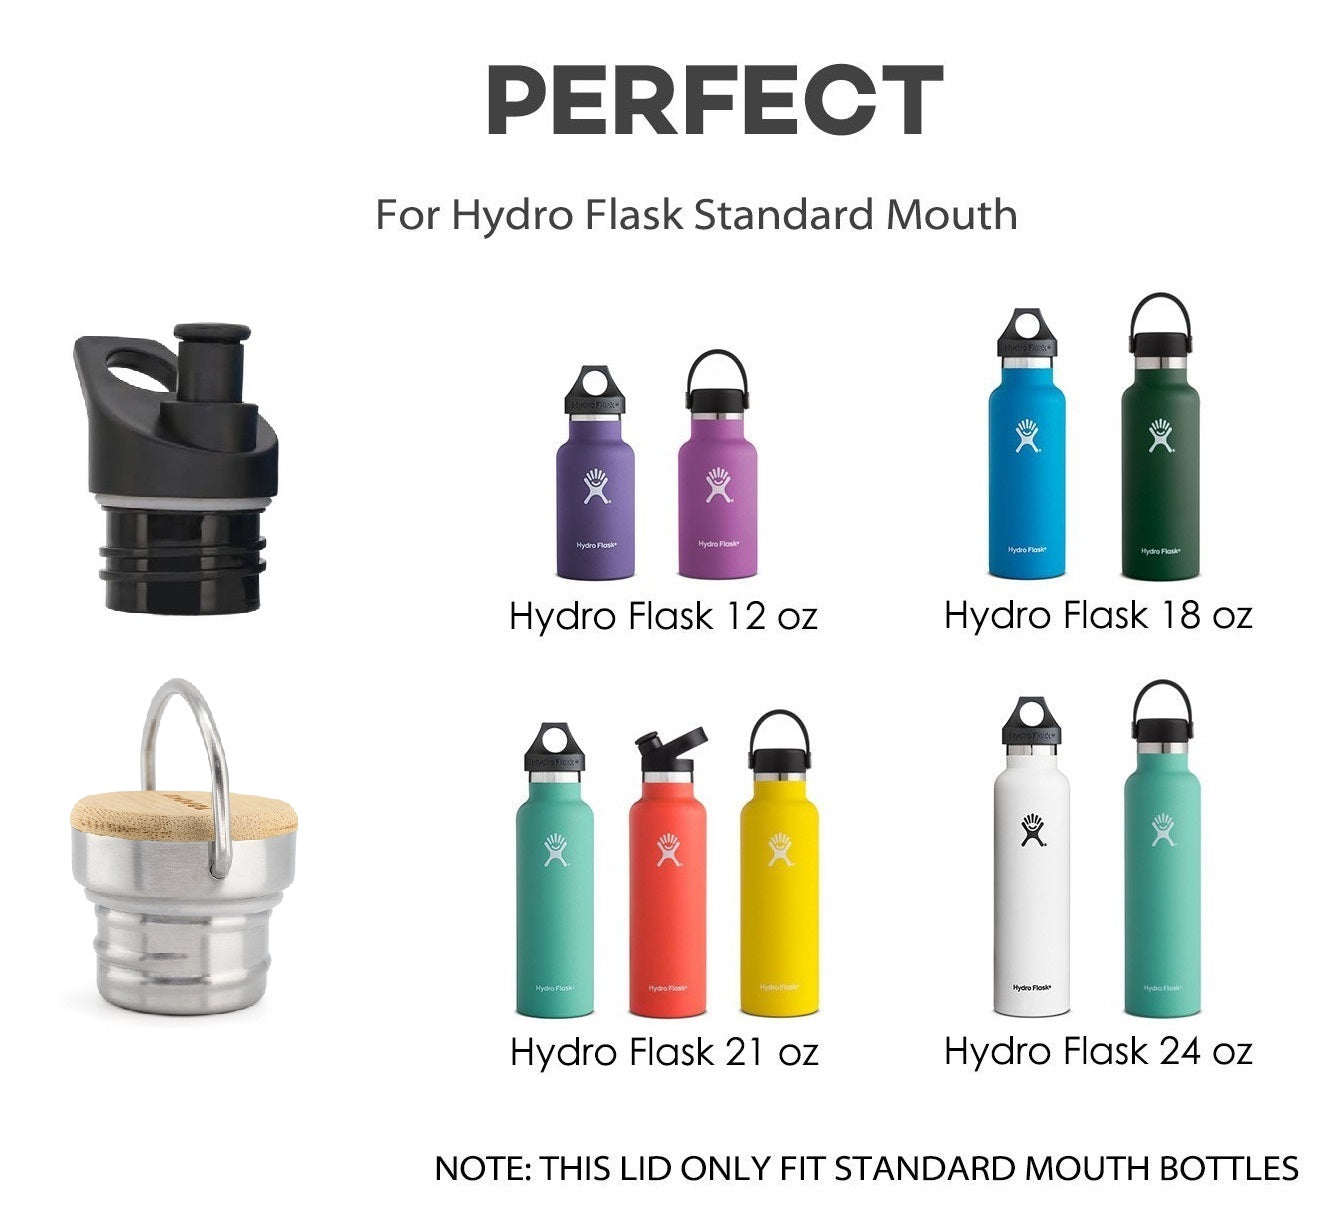 Replacement Lids For Hydro Flask Standard Mouth Water Bottle-Bite Valve Stainless Steel Lid Twist Sports Lid Straw Lid For Hydro Flask Bottle